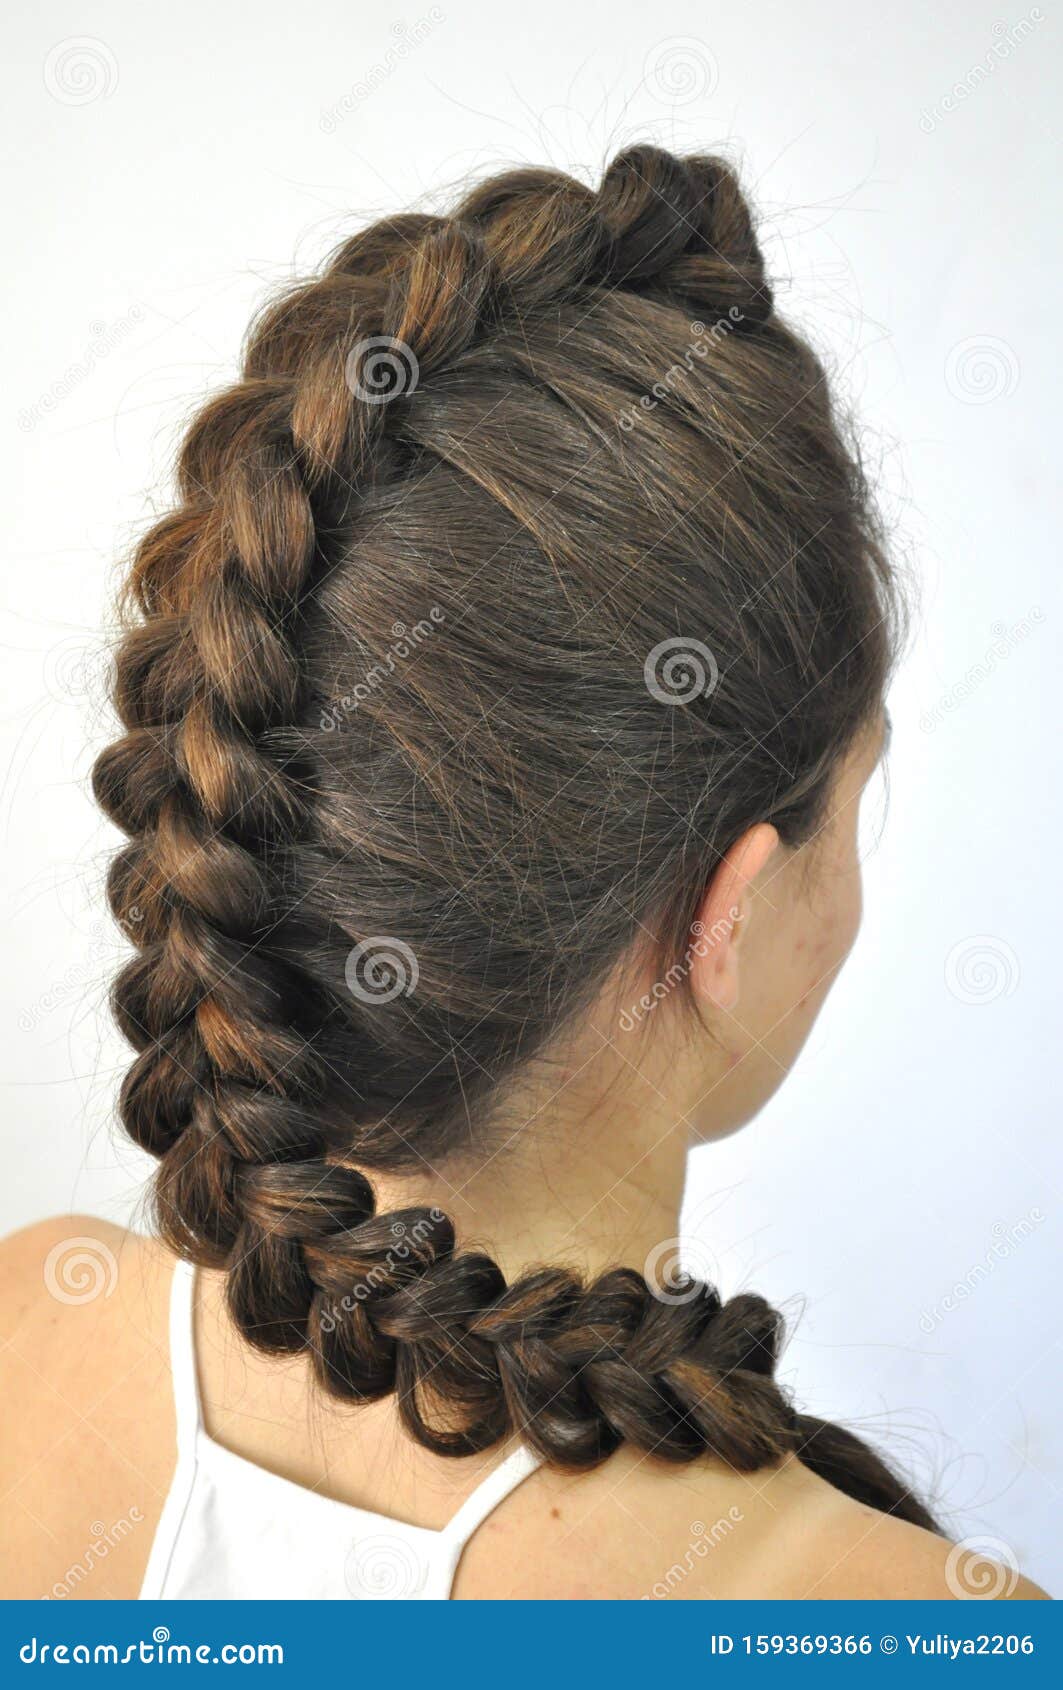 Hairstyle on long hair stock photo. Image of simple - 159369366